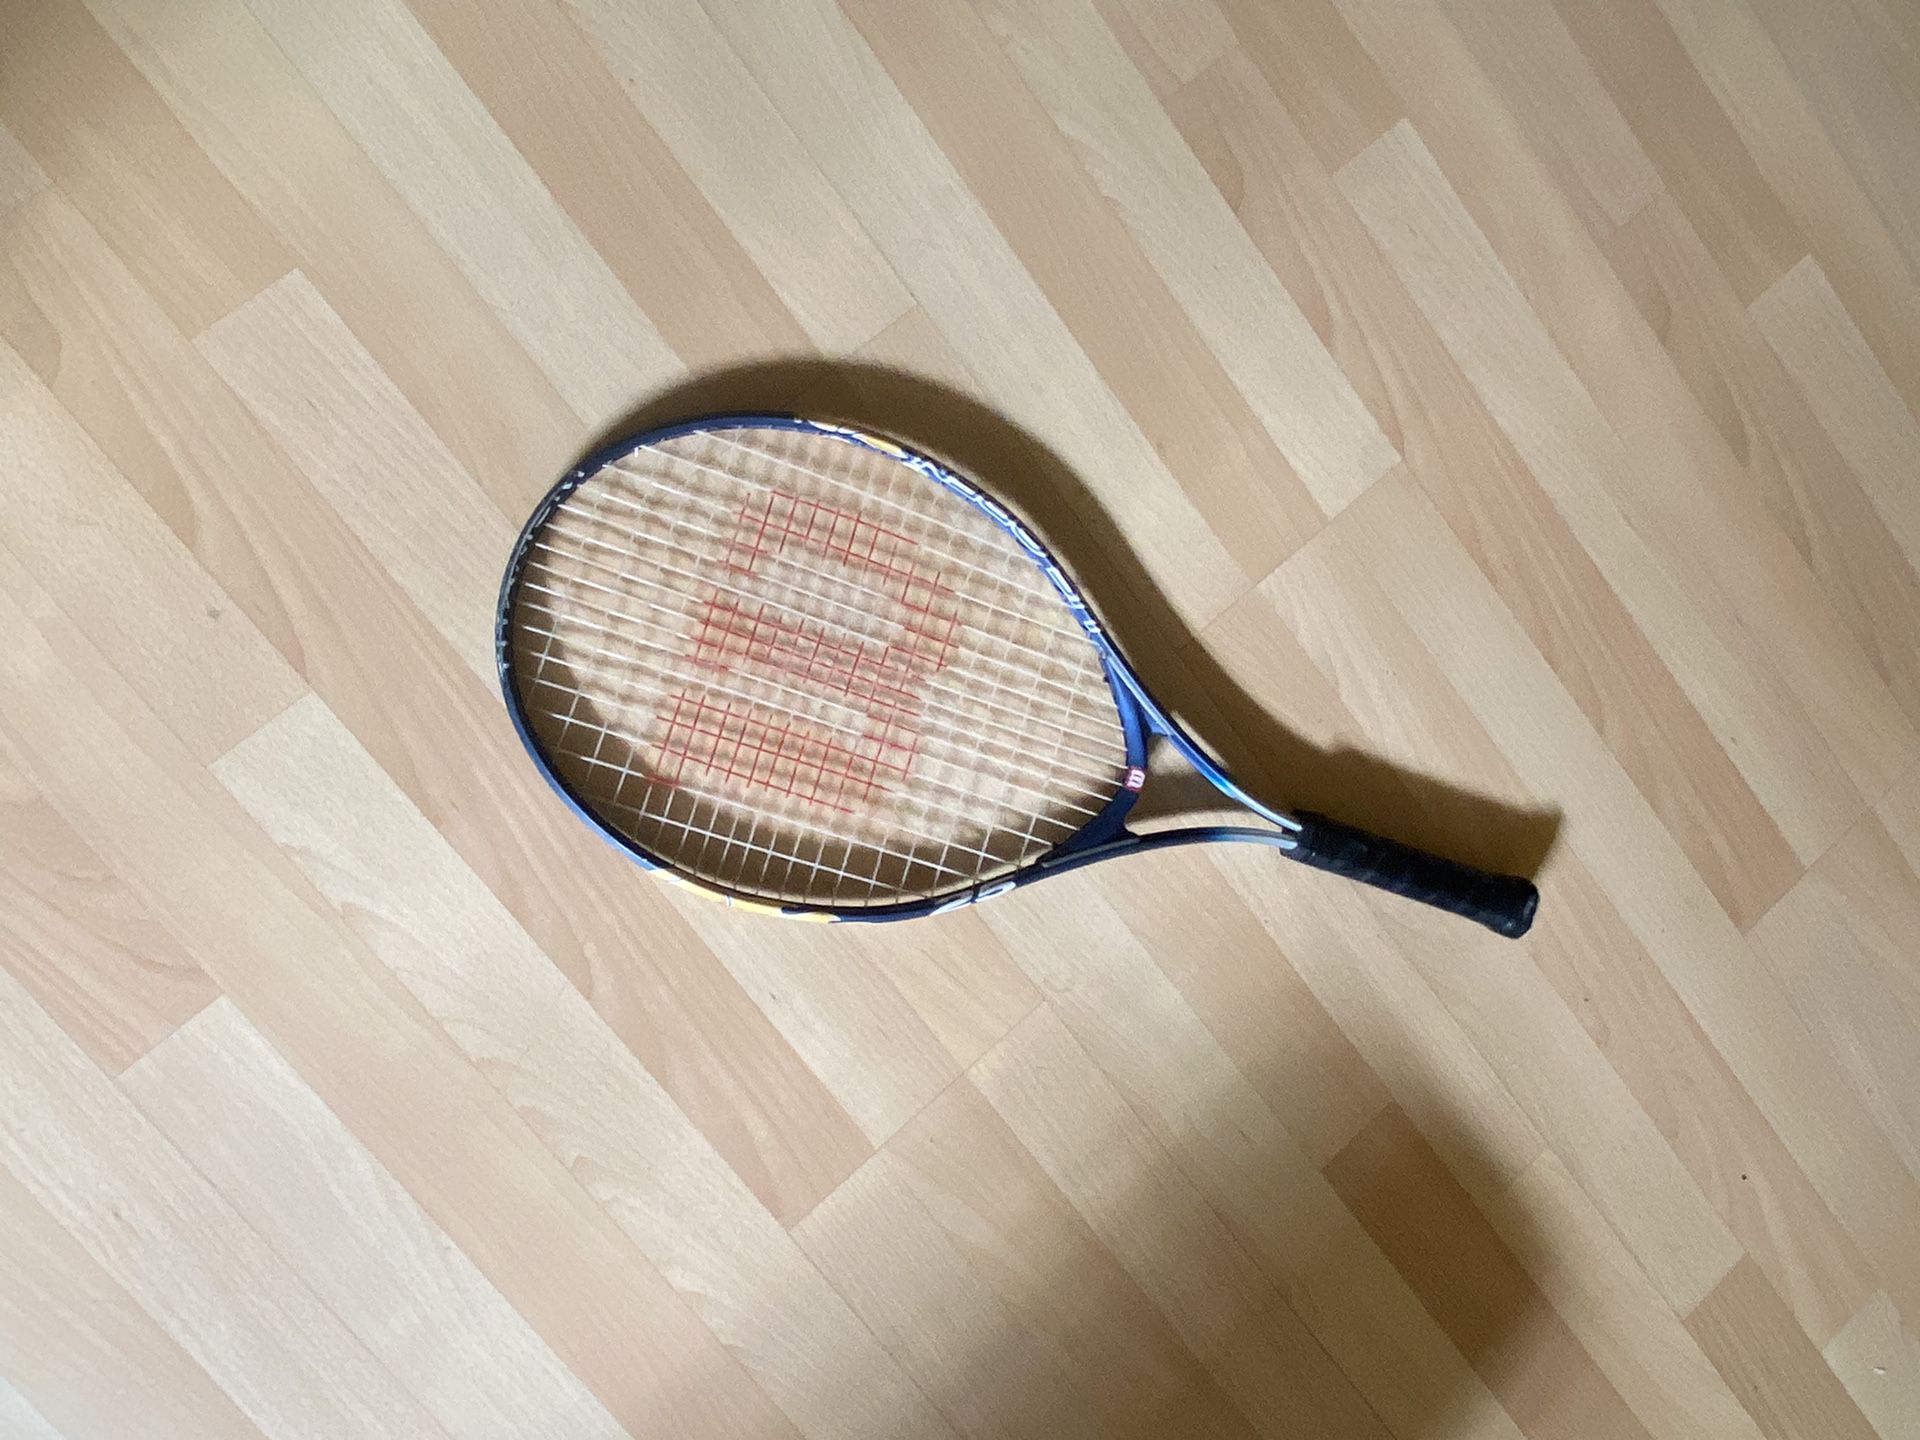 Wilson US Open Tennis Racket (used But In Good Condition)